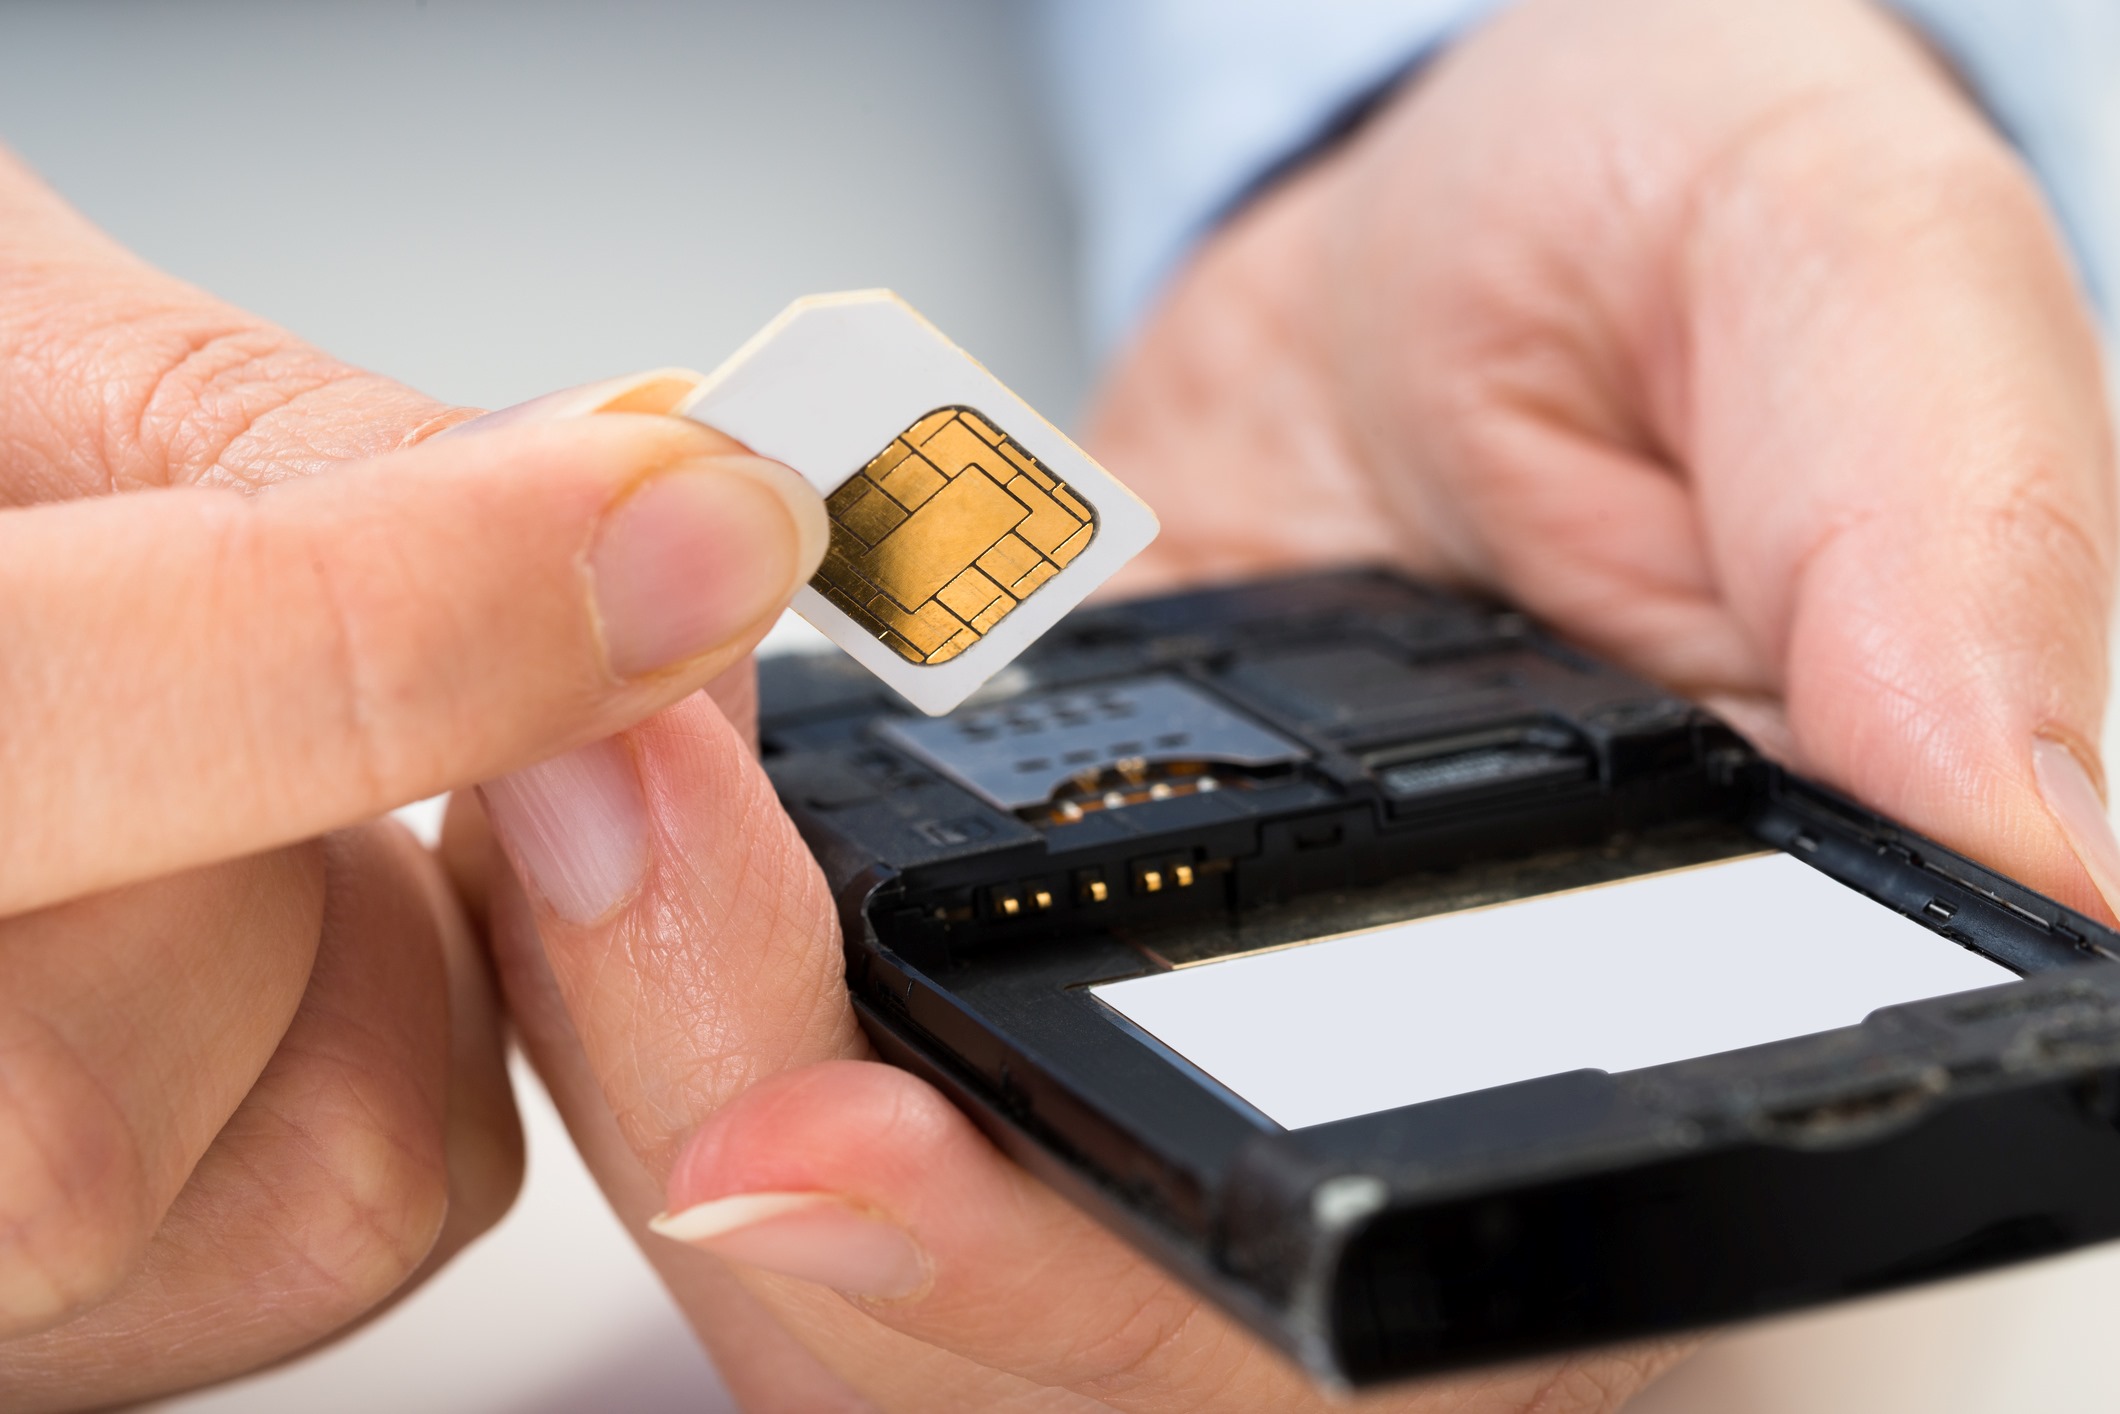 deactivating-your-att-sim-card-a-step-by-step-guide